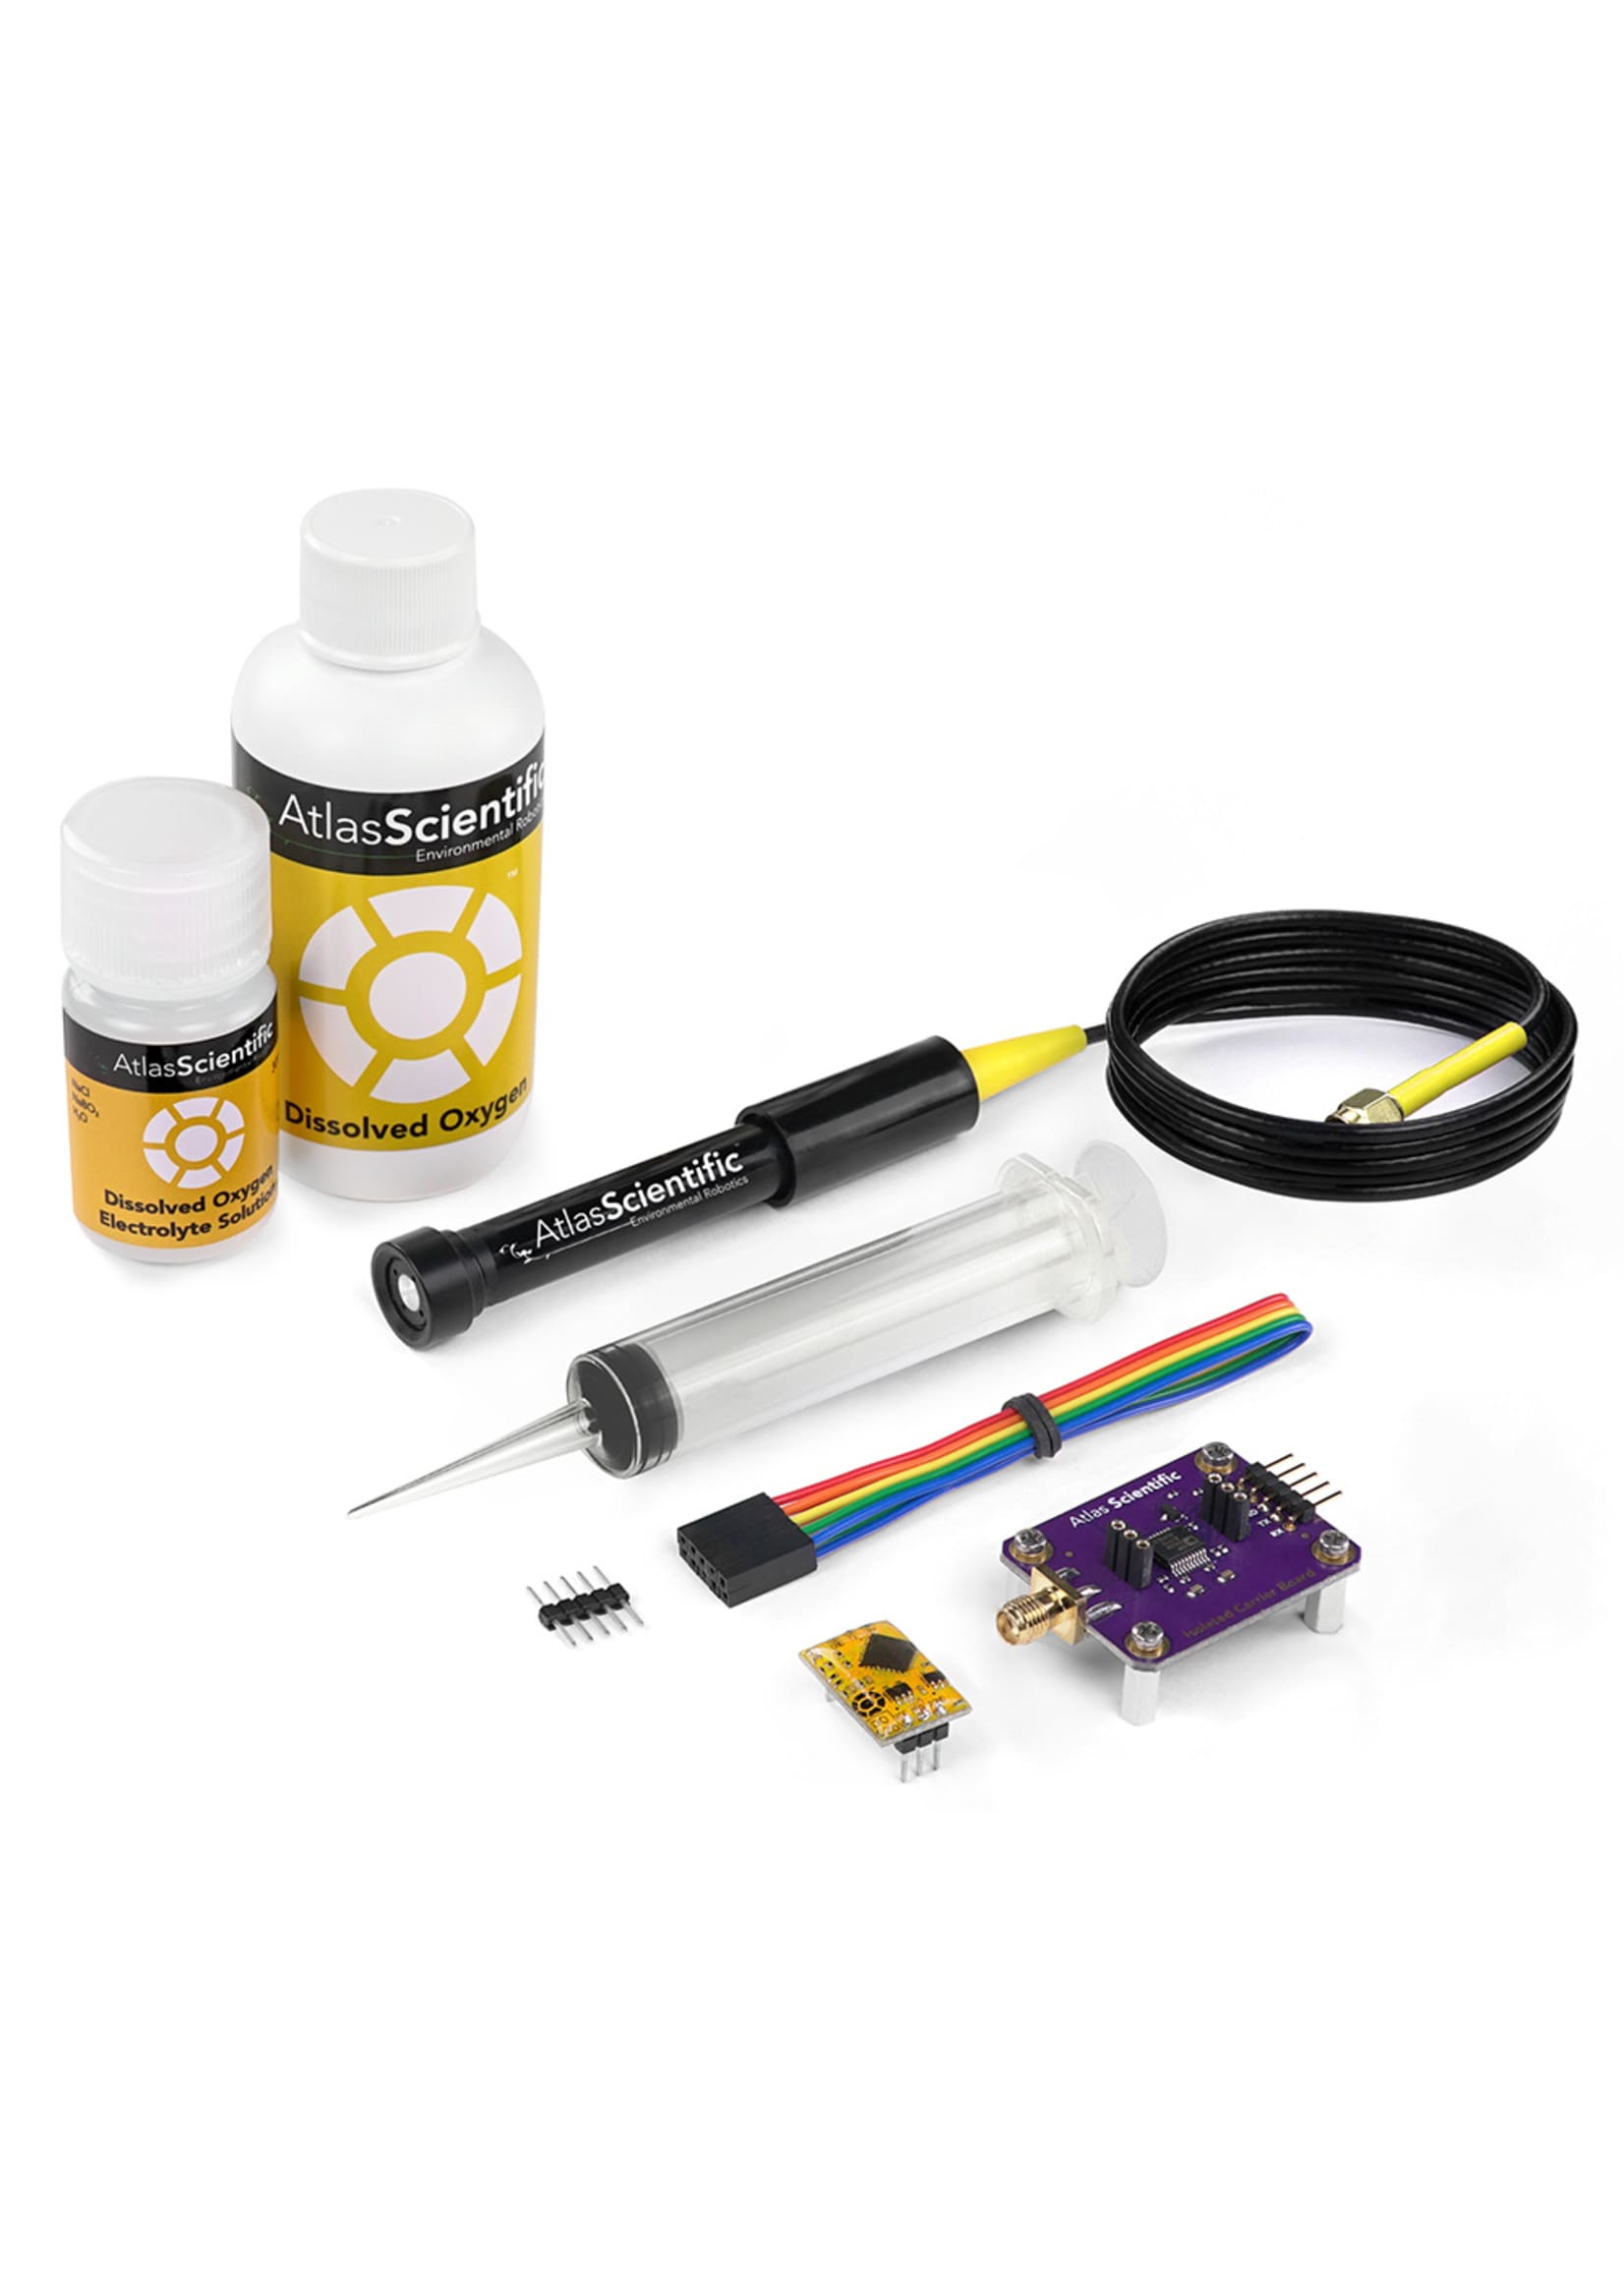 All products included in the Dissolved Oxygen Probe Kit